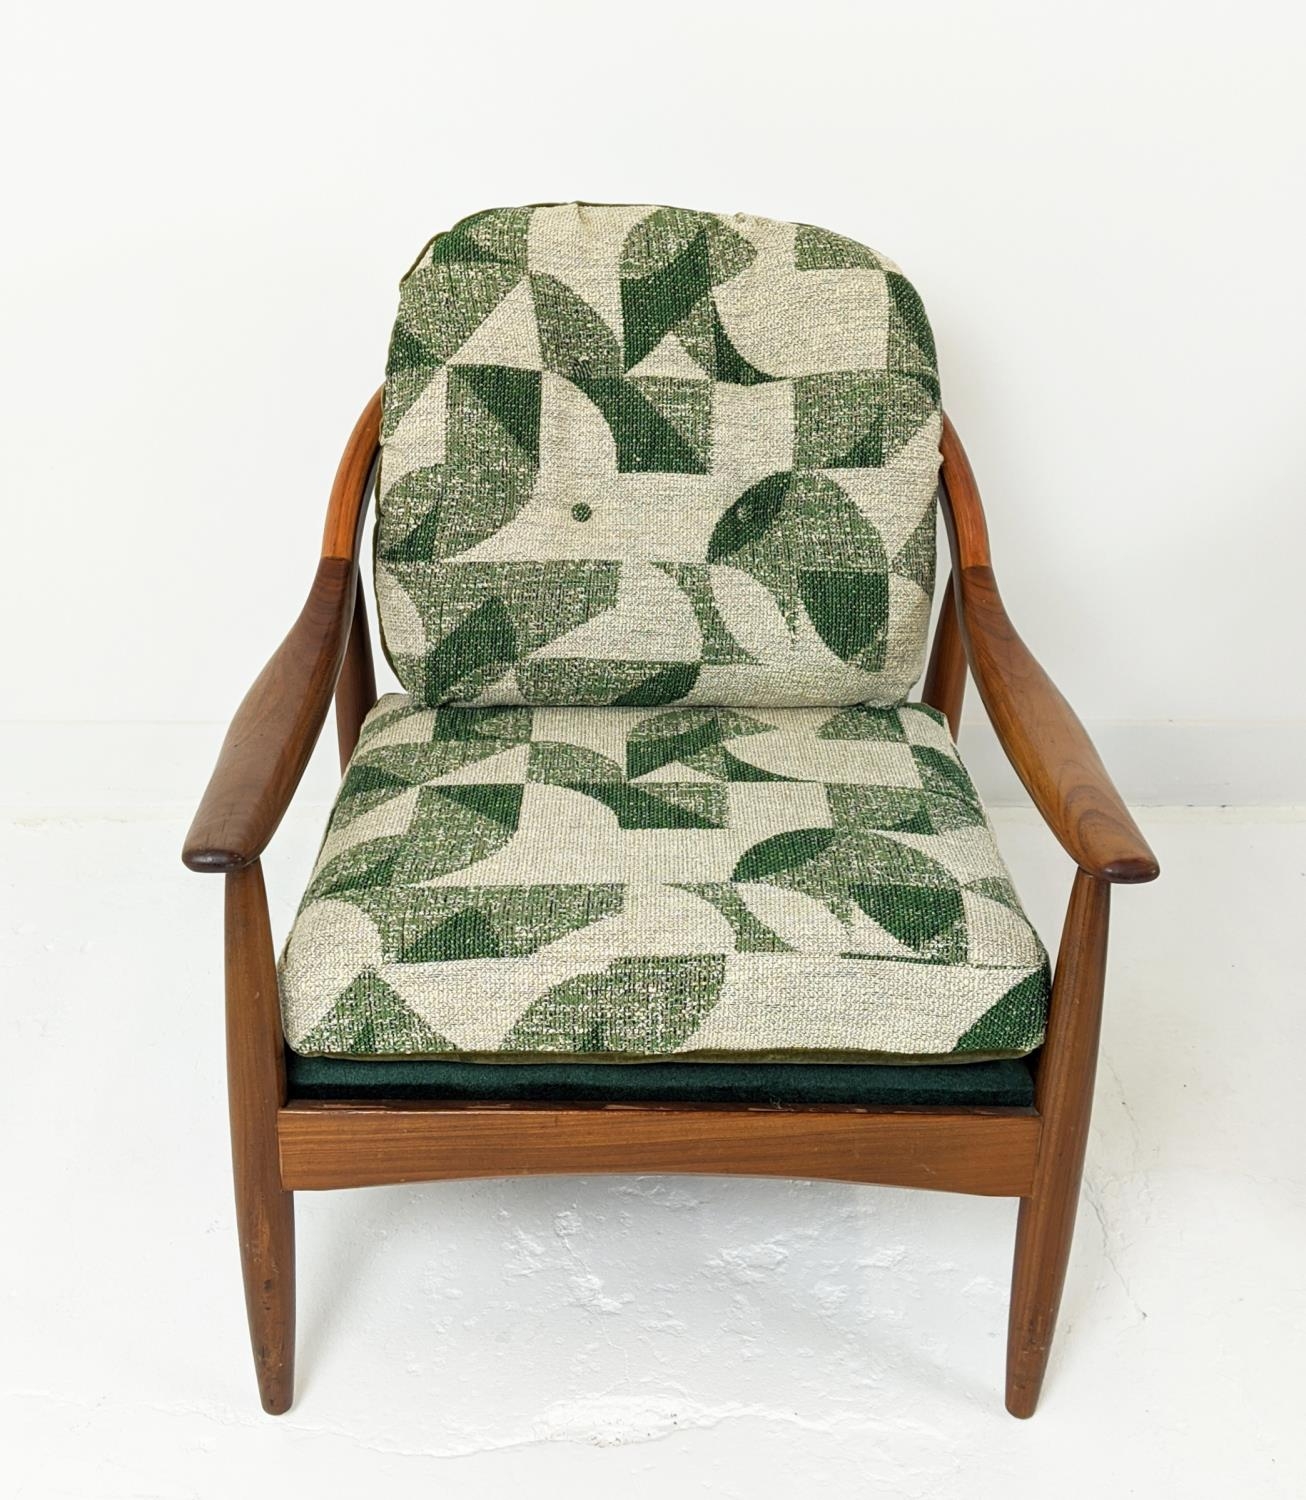 ARMCHAIRS, a pair, mid 20th century Danish teak with geometric patterned and green plush cushions, - Image 4 of 10